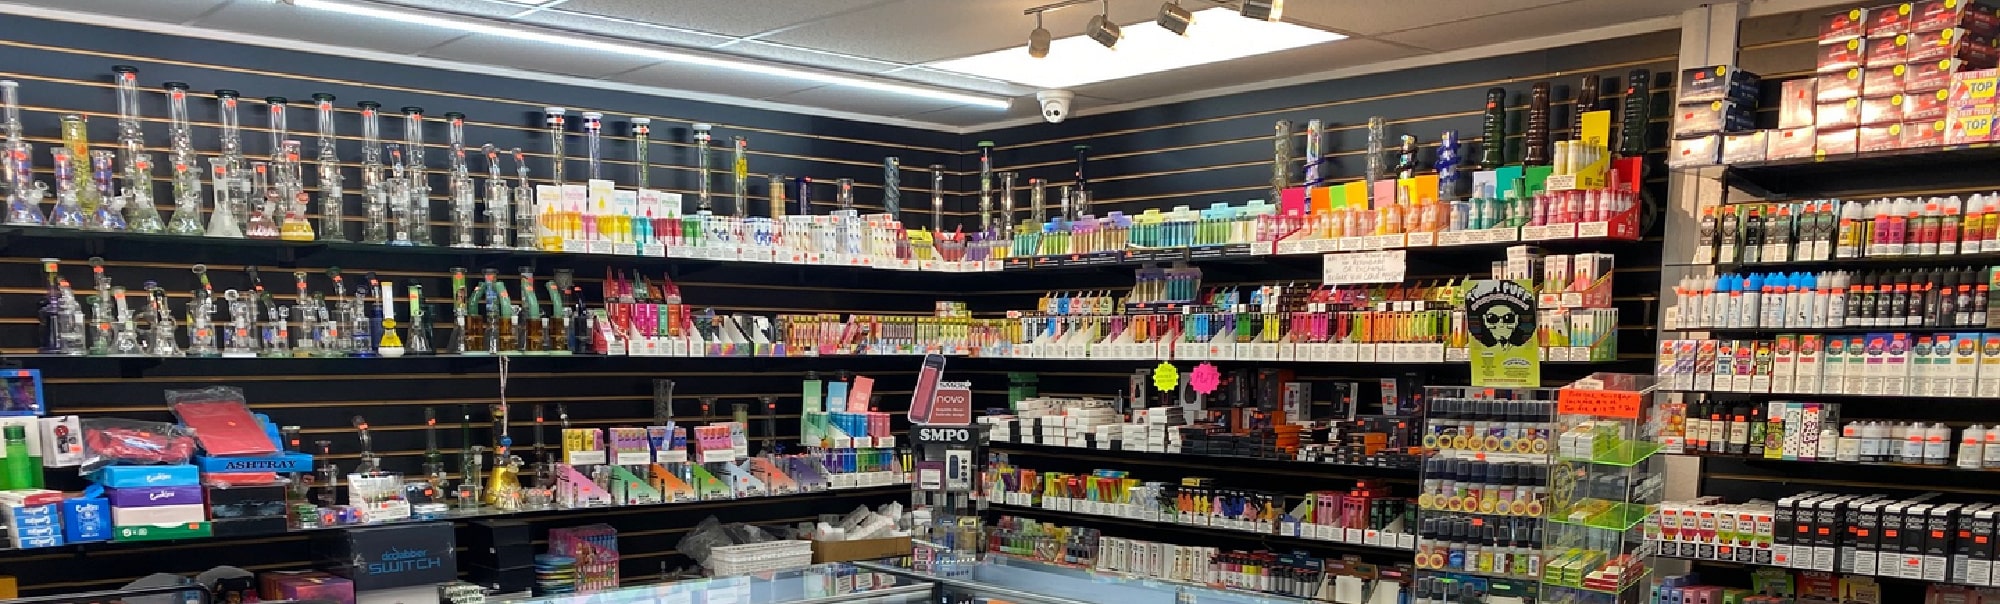 image of smoke 1 tobacco products in chattanooga tn